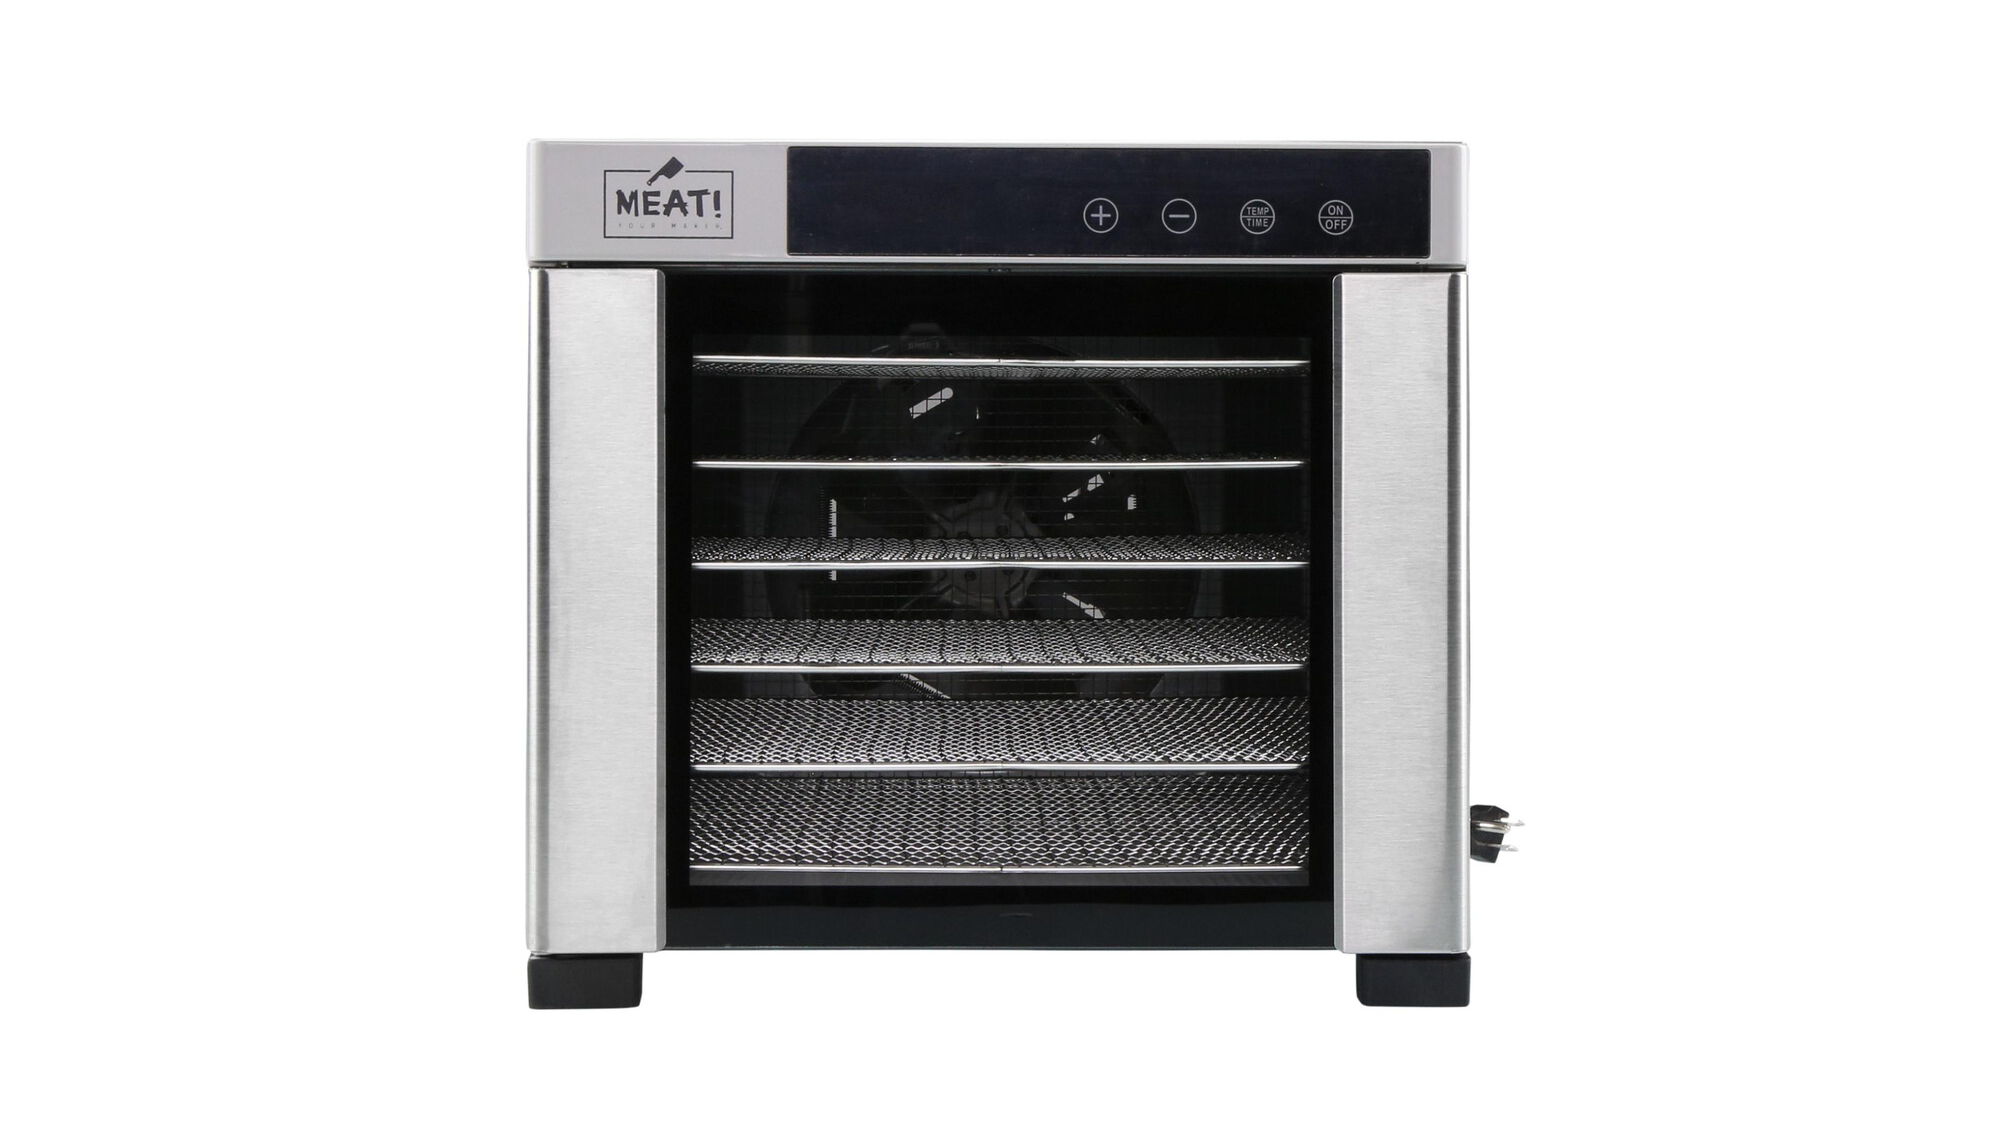 https://www.meatyourmaker.com/dw/image/v2/BCNX_PRD/on/demandware.static/-/Sites-meat-master/default/dw70d4a156/images/1117082/original/1117082_1_6-Tray_Dehydrator_with_Timer.jpeg?sw=2000&sh=1128